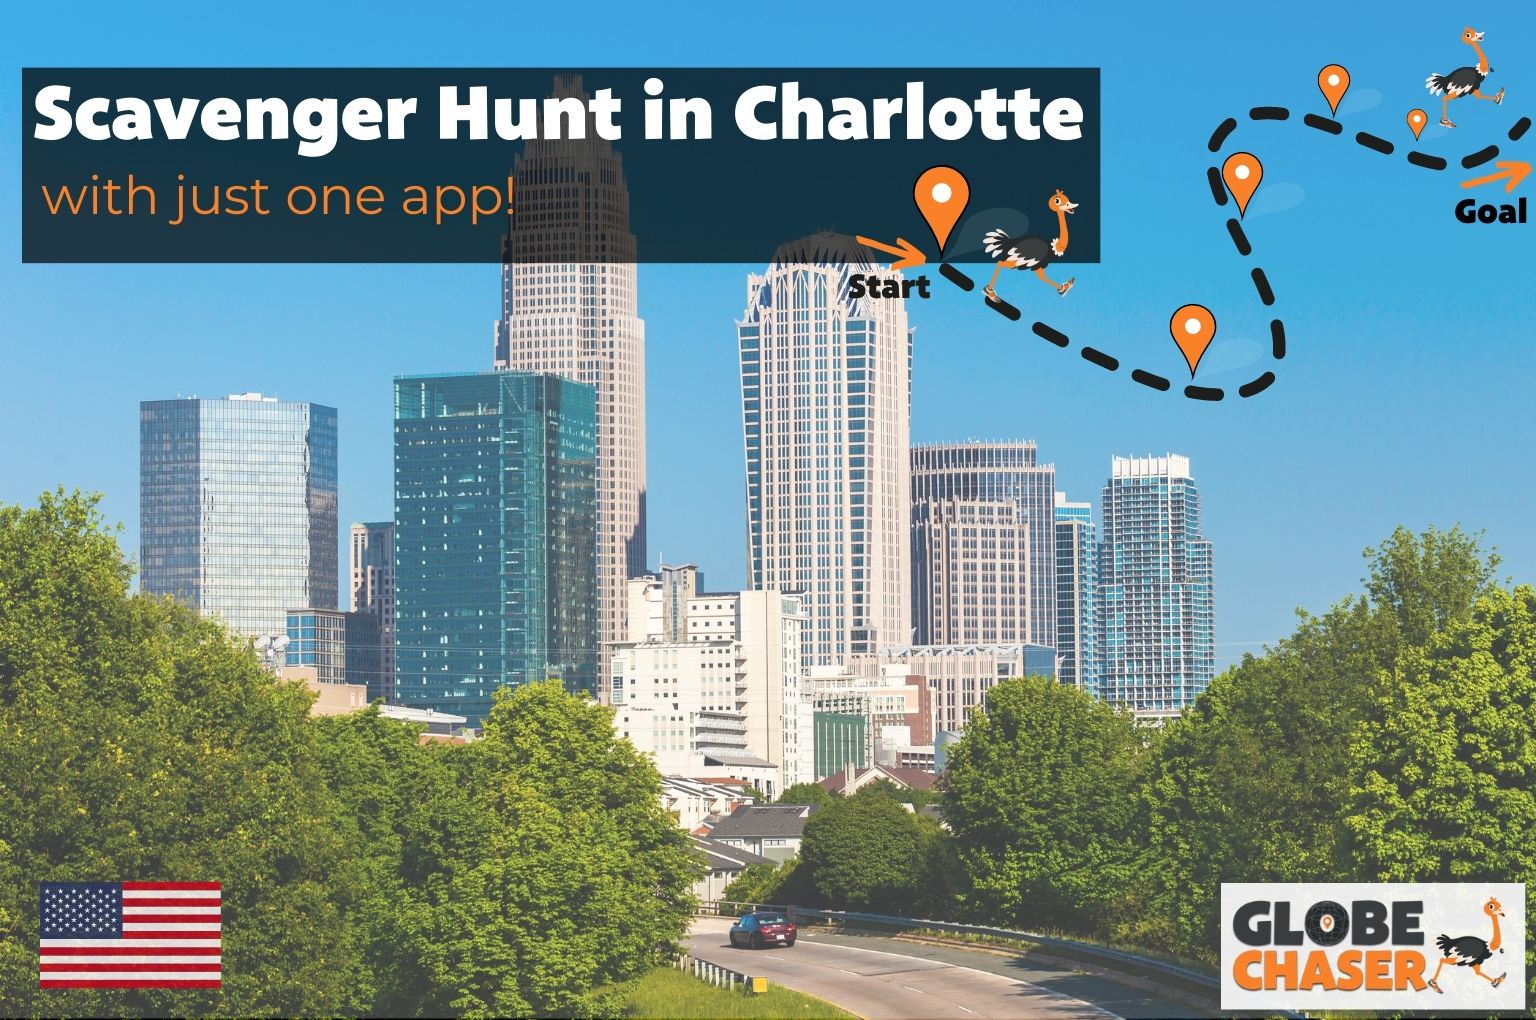 Scavenger Hunt in Charlotte, USA - Family Activities with the Globe Chaser App for Outdoor Fun